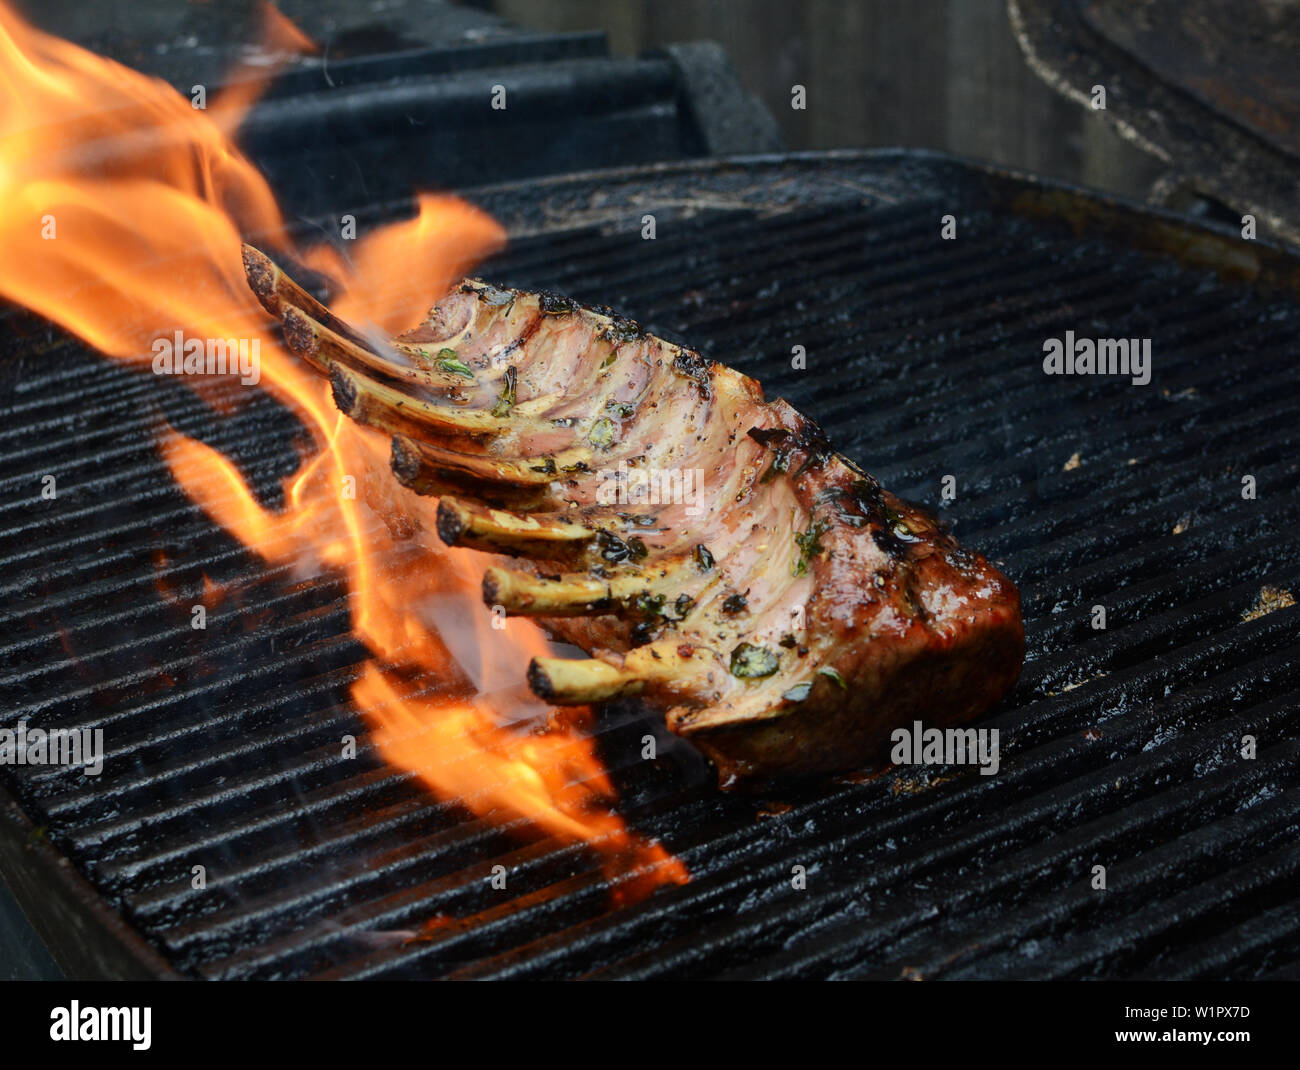 Large grilled rack of lamb over an open flame on a barbecue grill Stock Photo